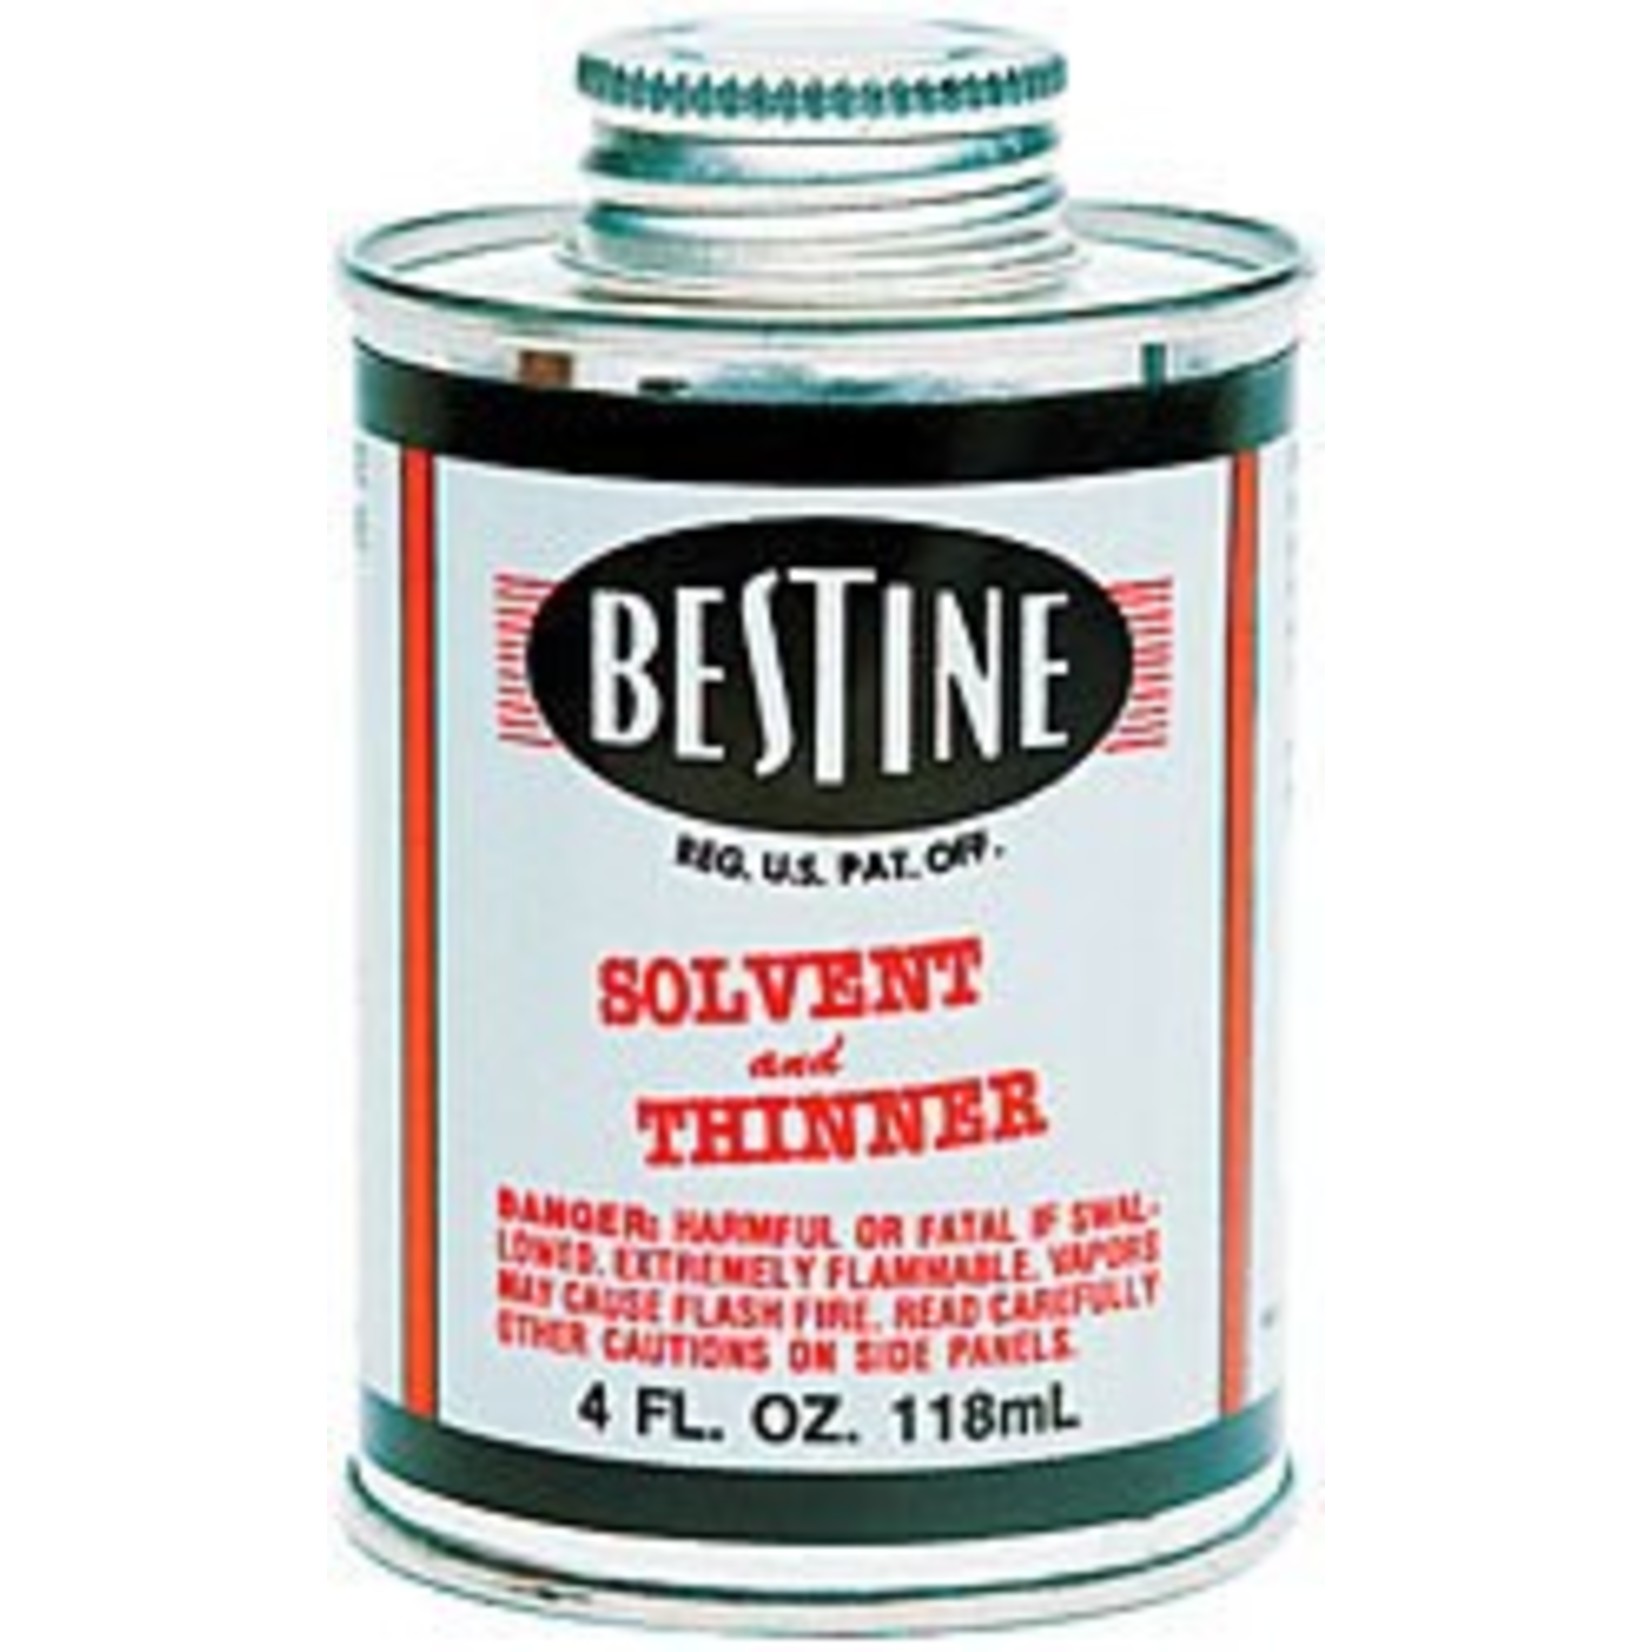 UNION RUBBER BESTINE SOLVENT AND THINNER 4OZ